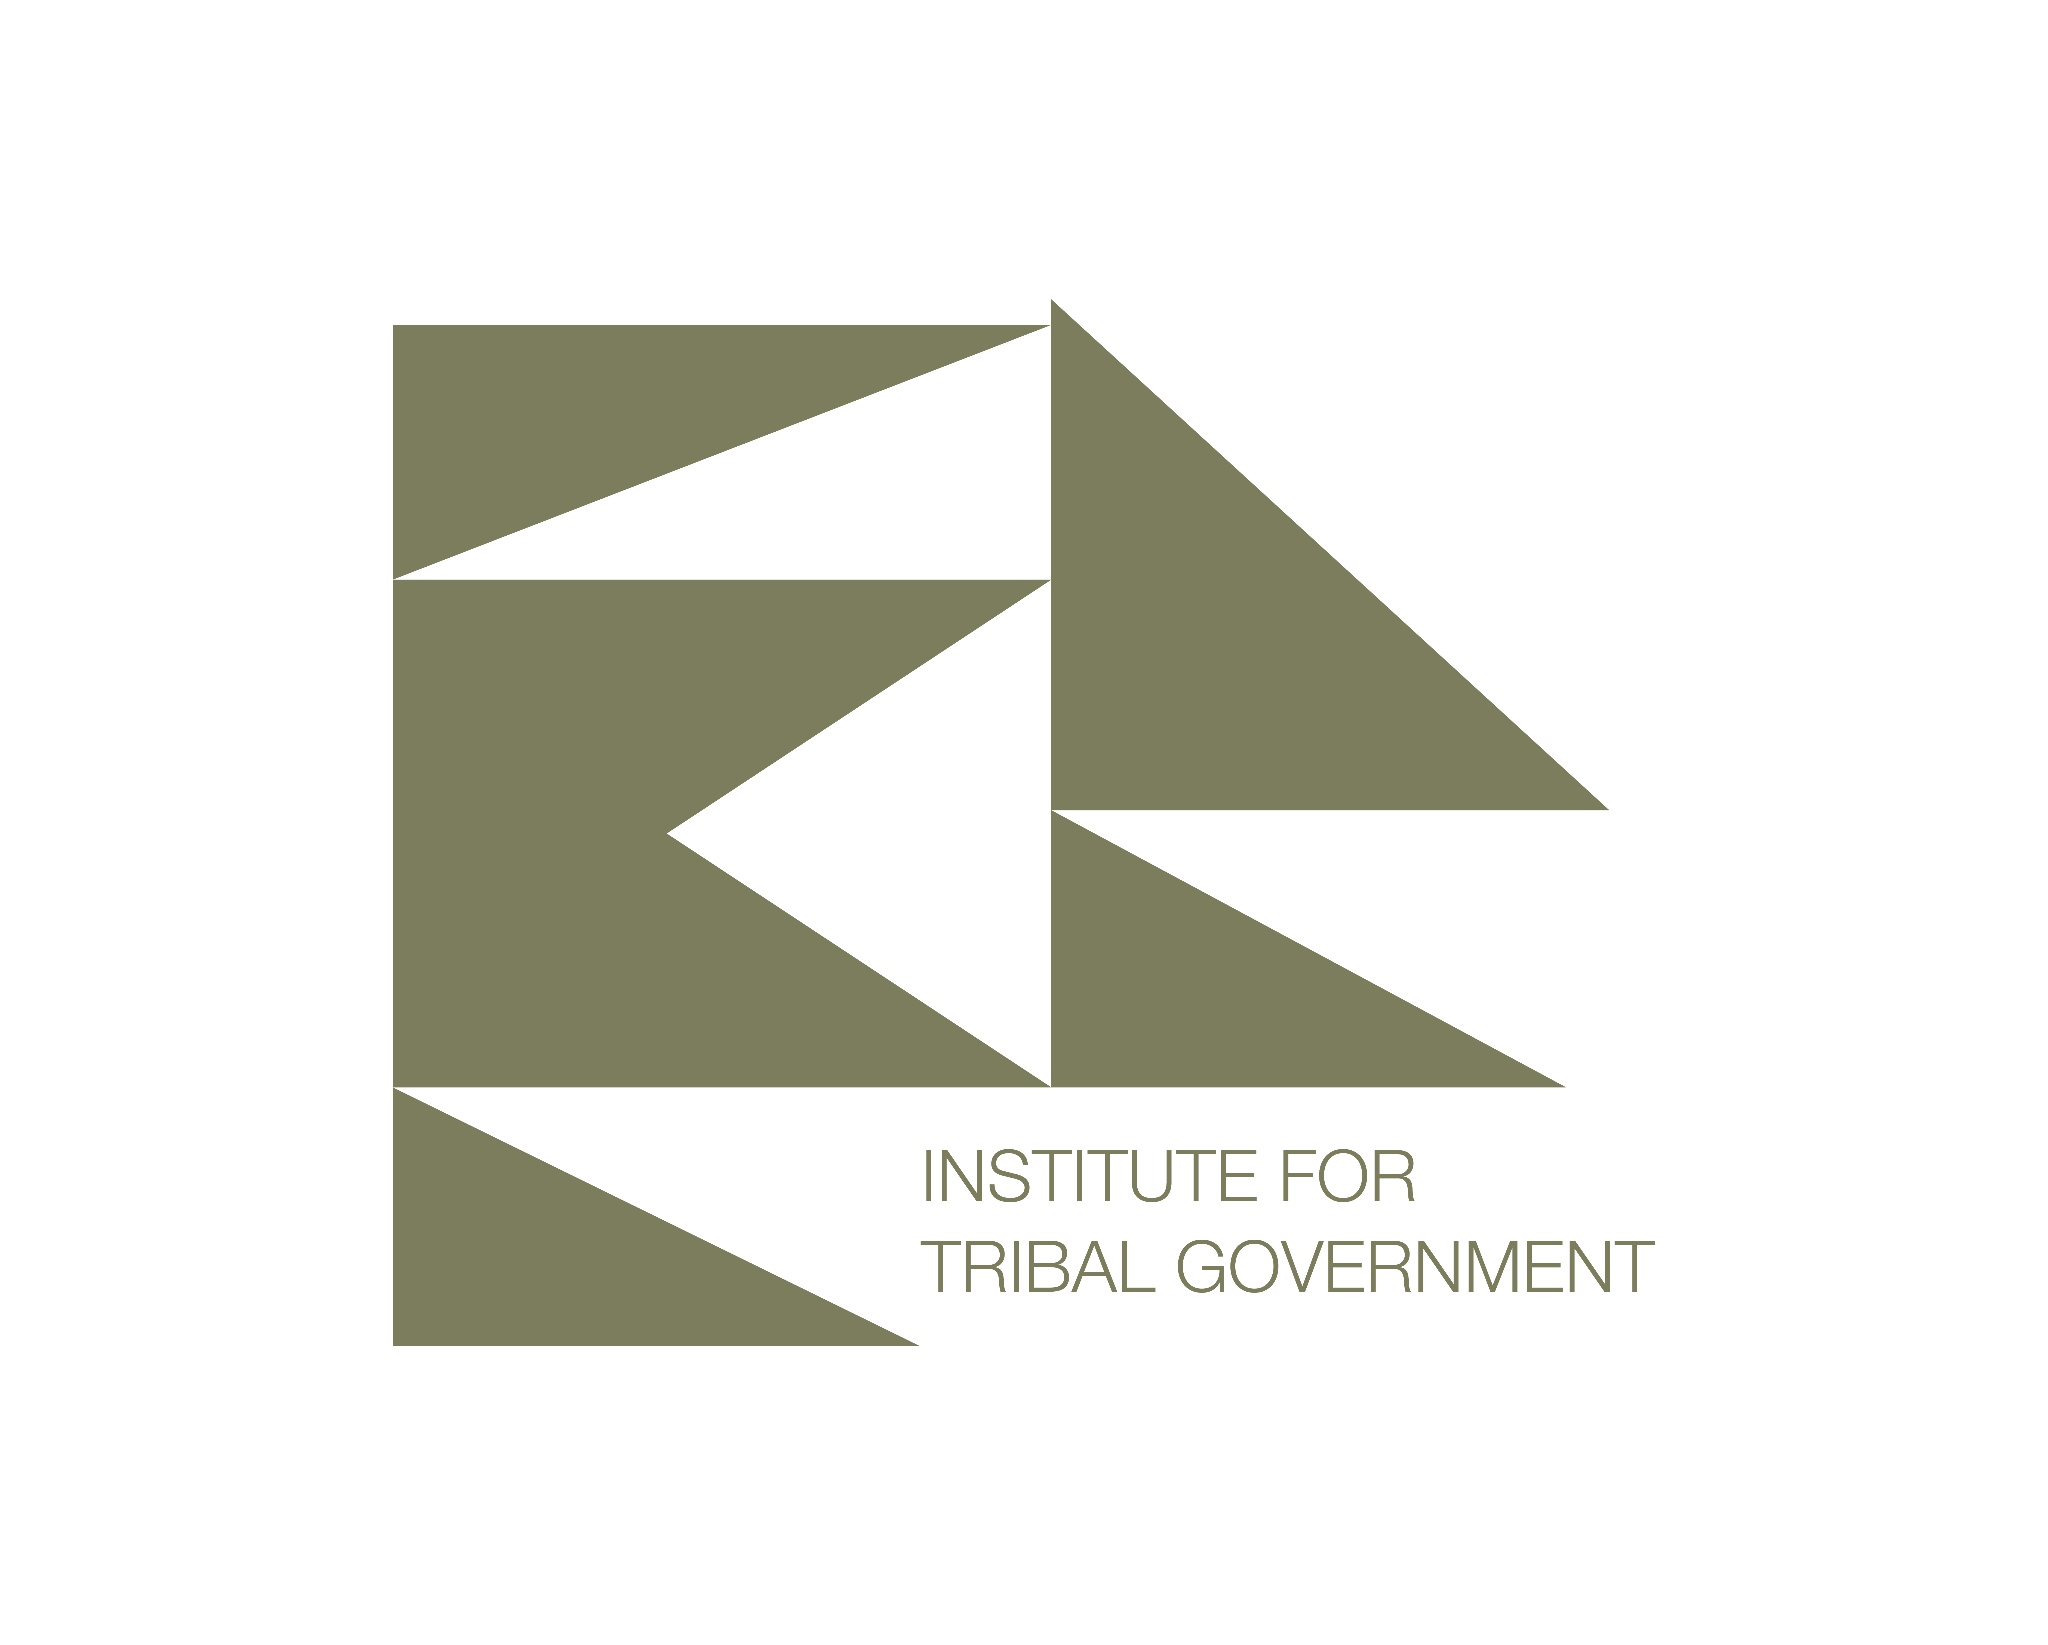 Logo for the Institute for Tribal Government at PSU, showing green triangle graphics